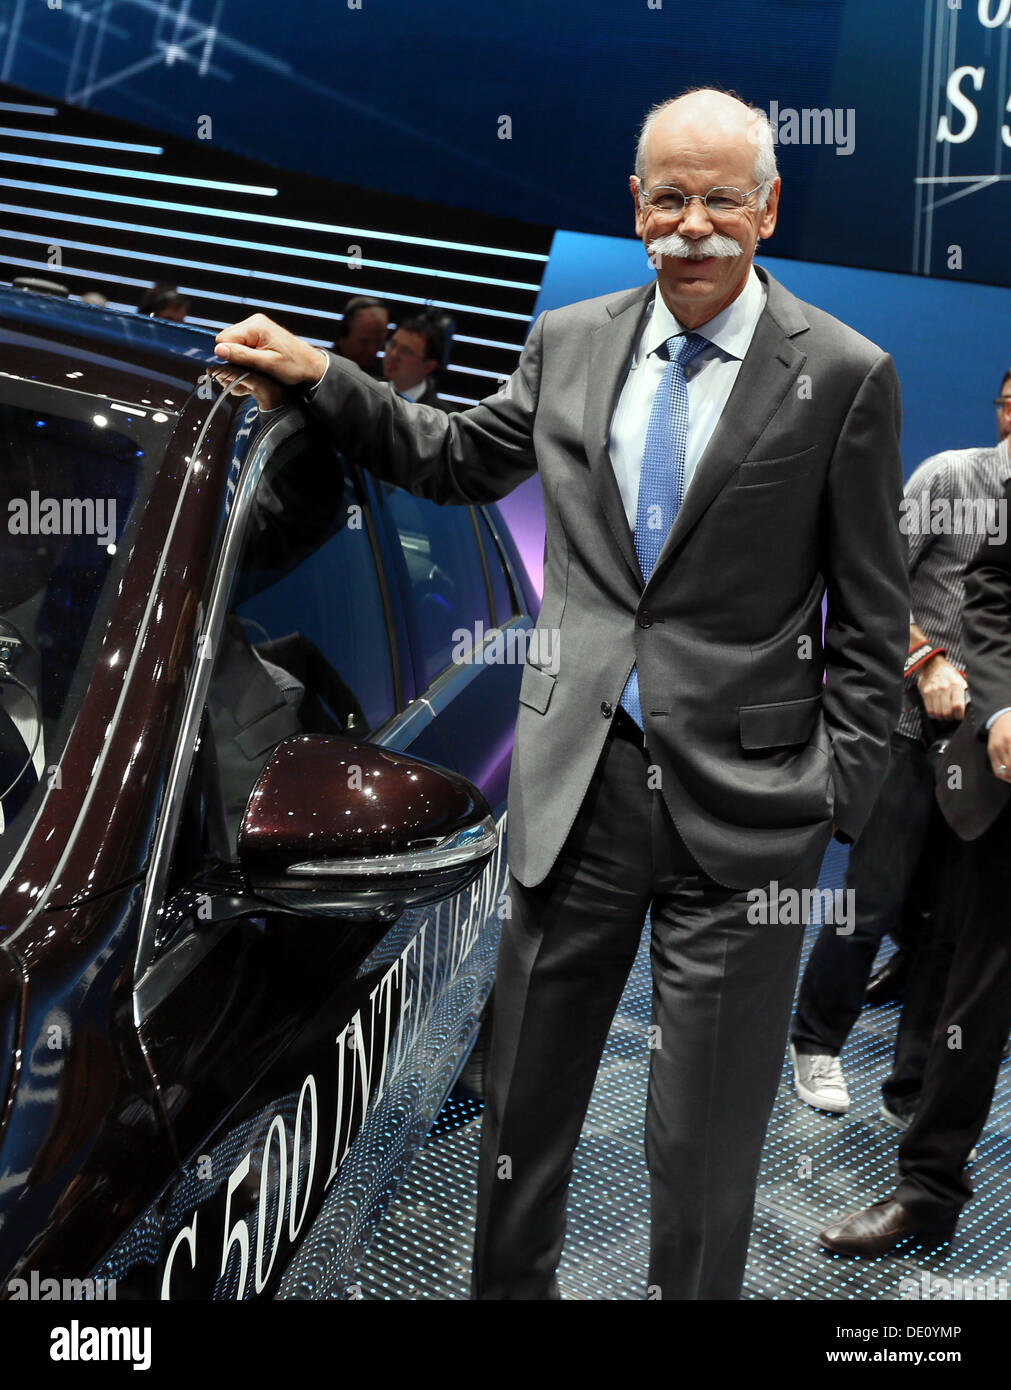 Frankfurt Main, Germany. 09th Sep, 2013. Chairman of Daimler AG, Dieter Zetsche, stands next to a Mercedes S500 Intelligent Drive at the 'Mercedes-Benz & smart Media Night' on the evening before the start of the first press day of the Frankfurt Motor Show (IAA) in Frankfurt Main, Germany, 09 September 2013. The car is capable of navigating traffic without a driver. Almost 1100 exhibitors will present their novelties at the automotive trade show from 12 till 22 September 2013. Photo: FRANK RUMPENHORST/dpa/Alamy Live News Stock Photo